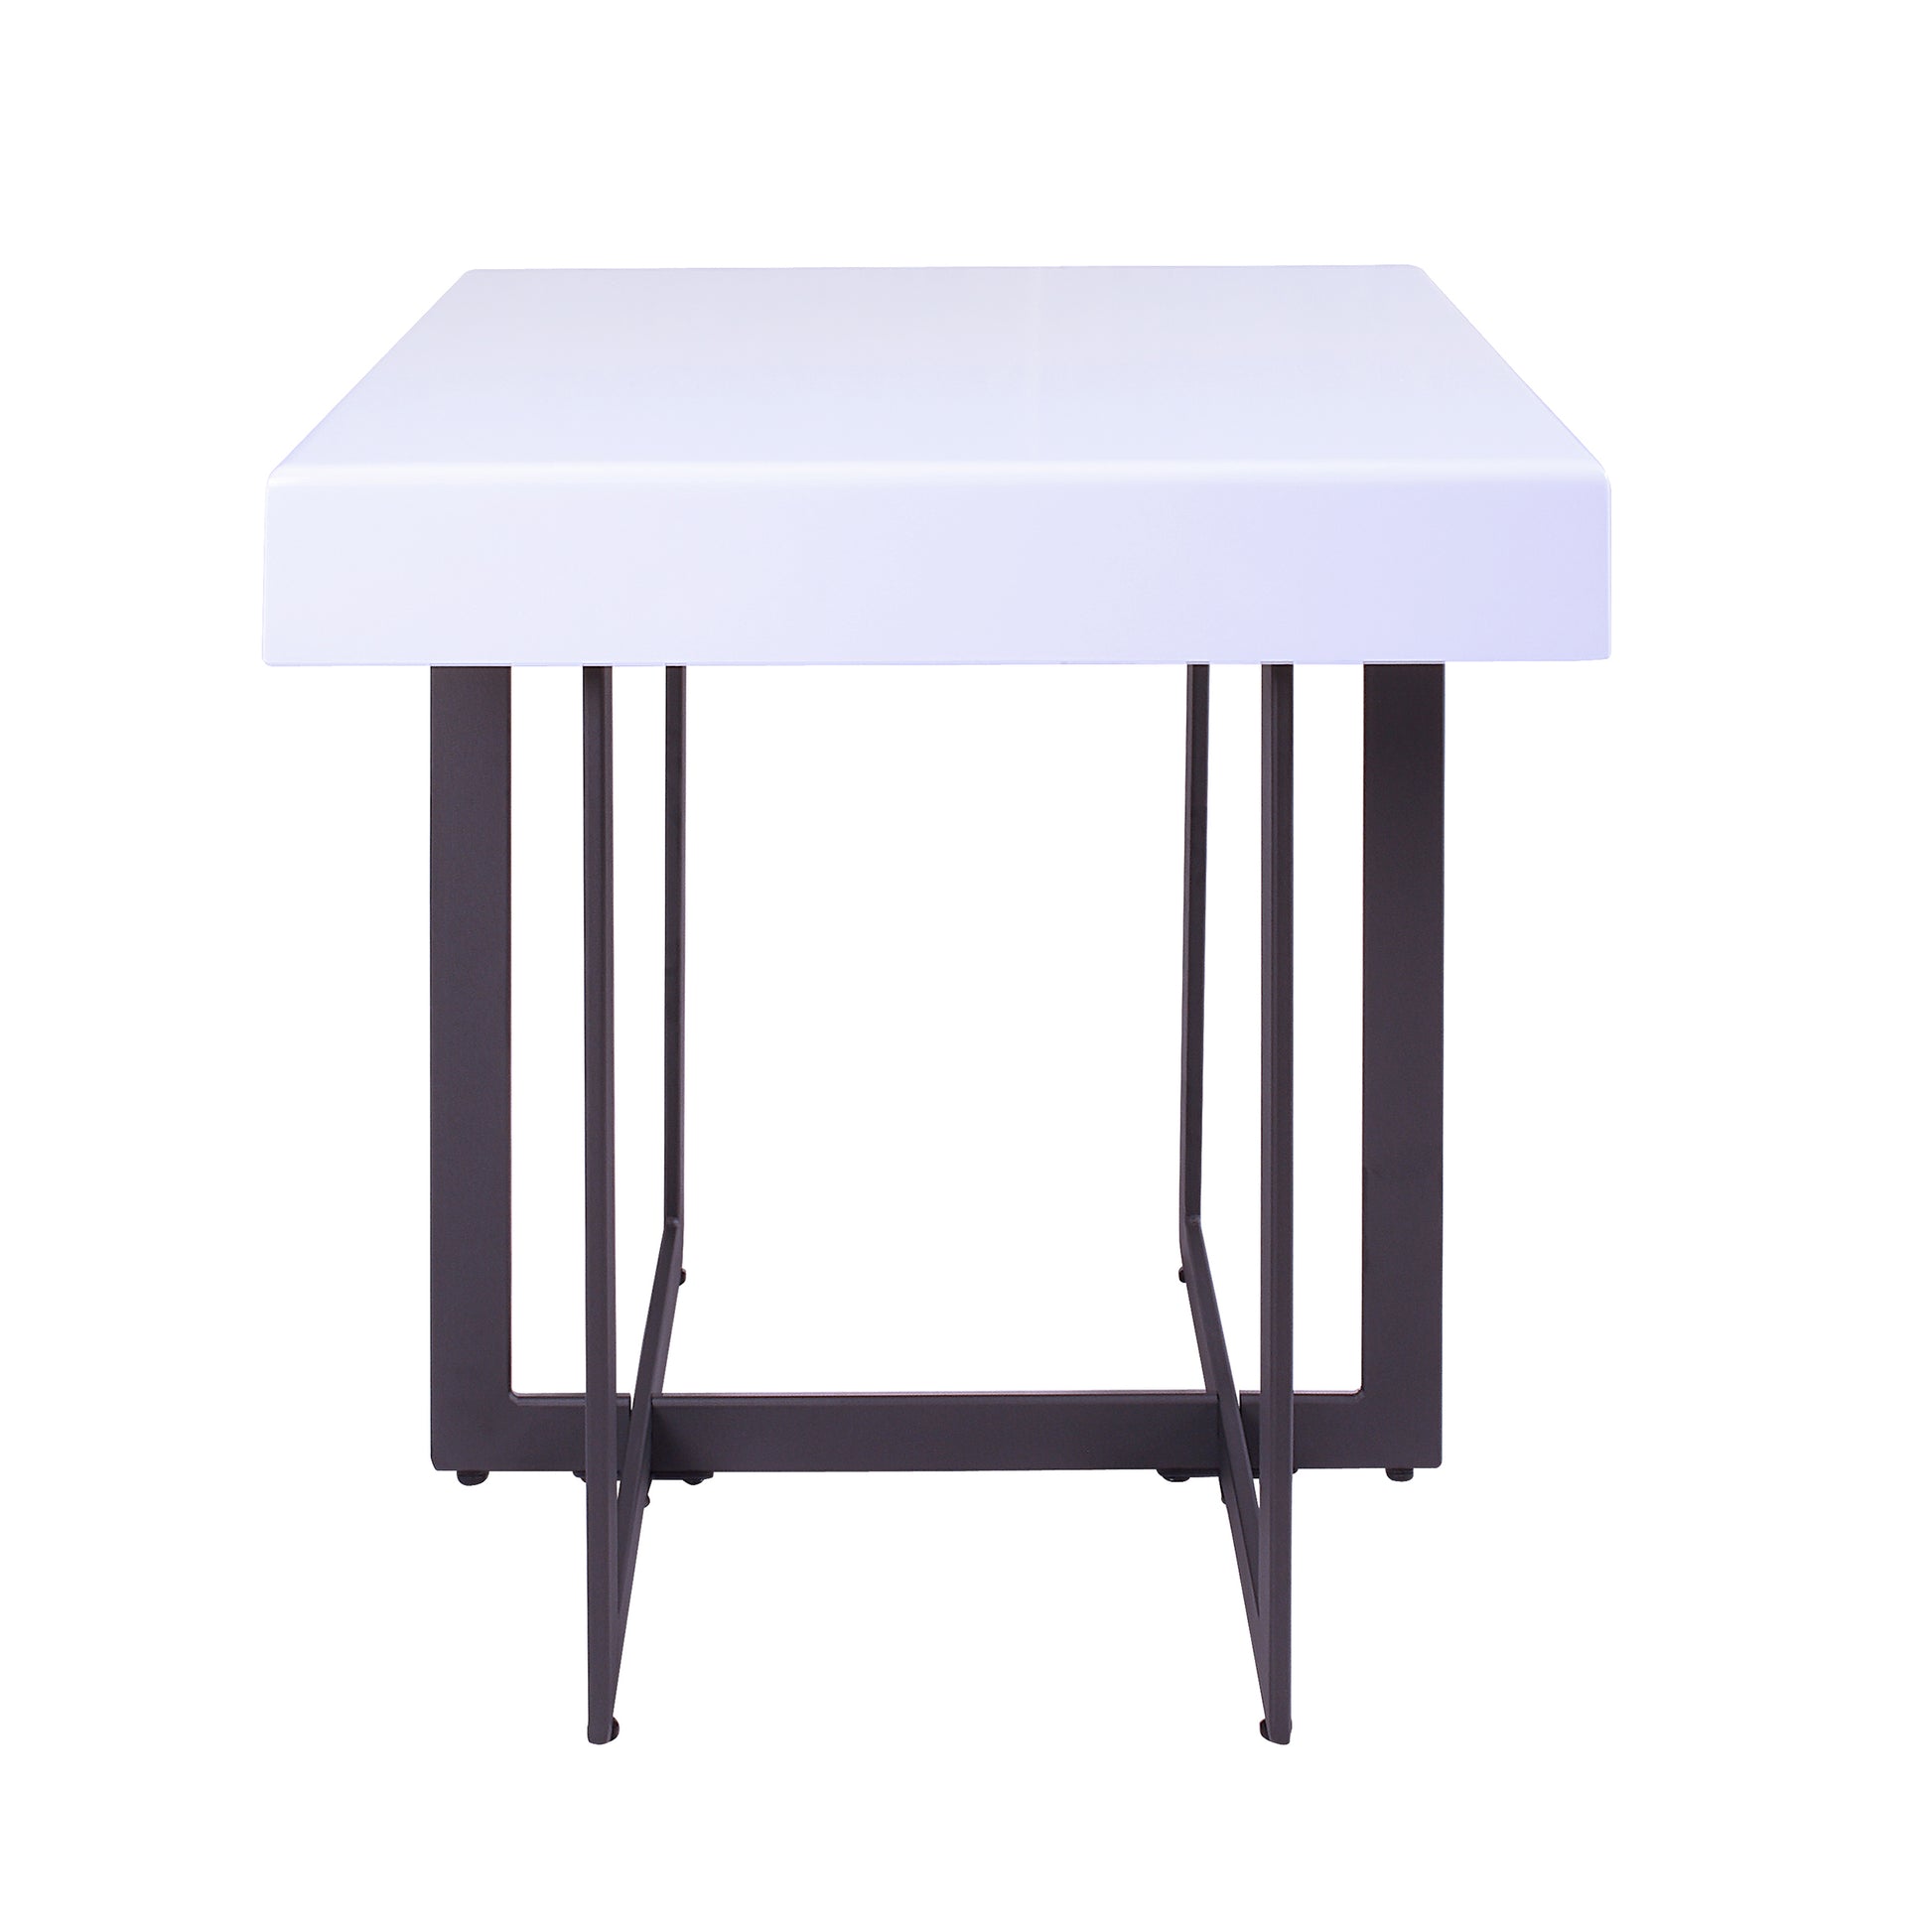 Front-facing end table only back view from a two-piece modern white high gloss and gunmetal storage coffee table set with hidden drawer open on a white background